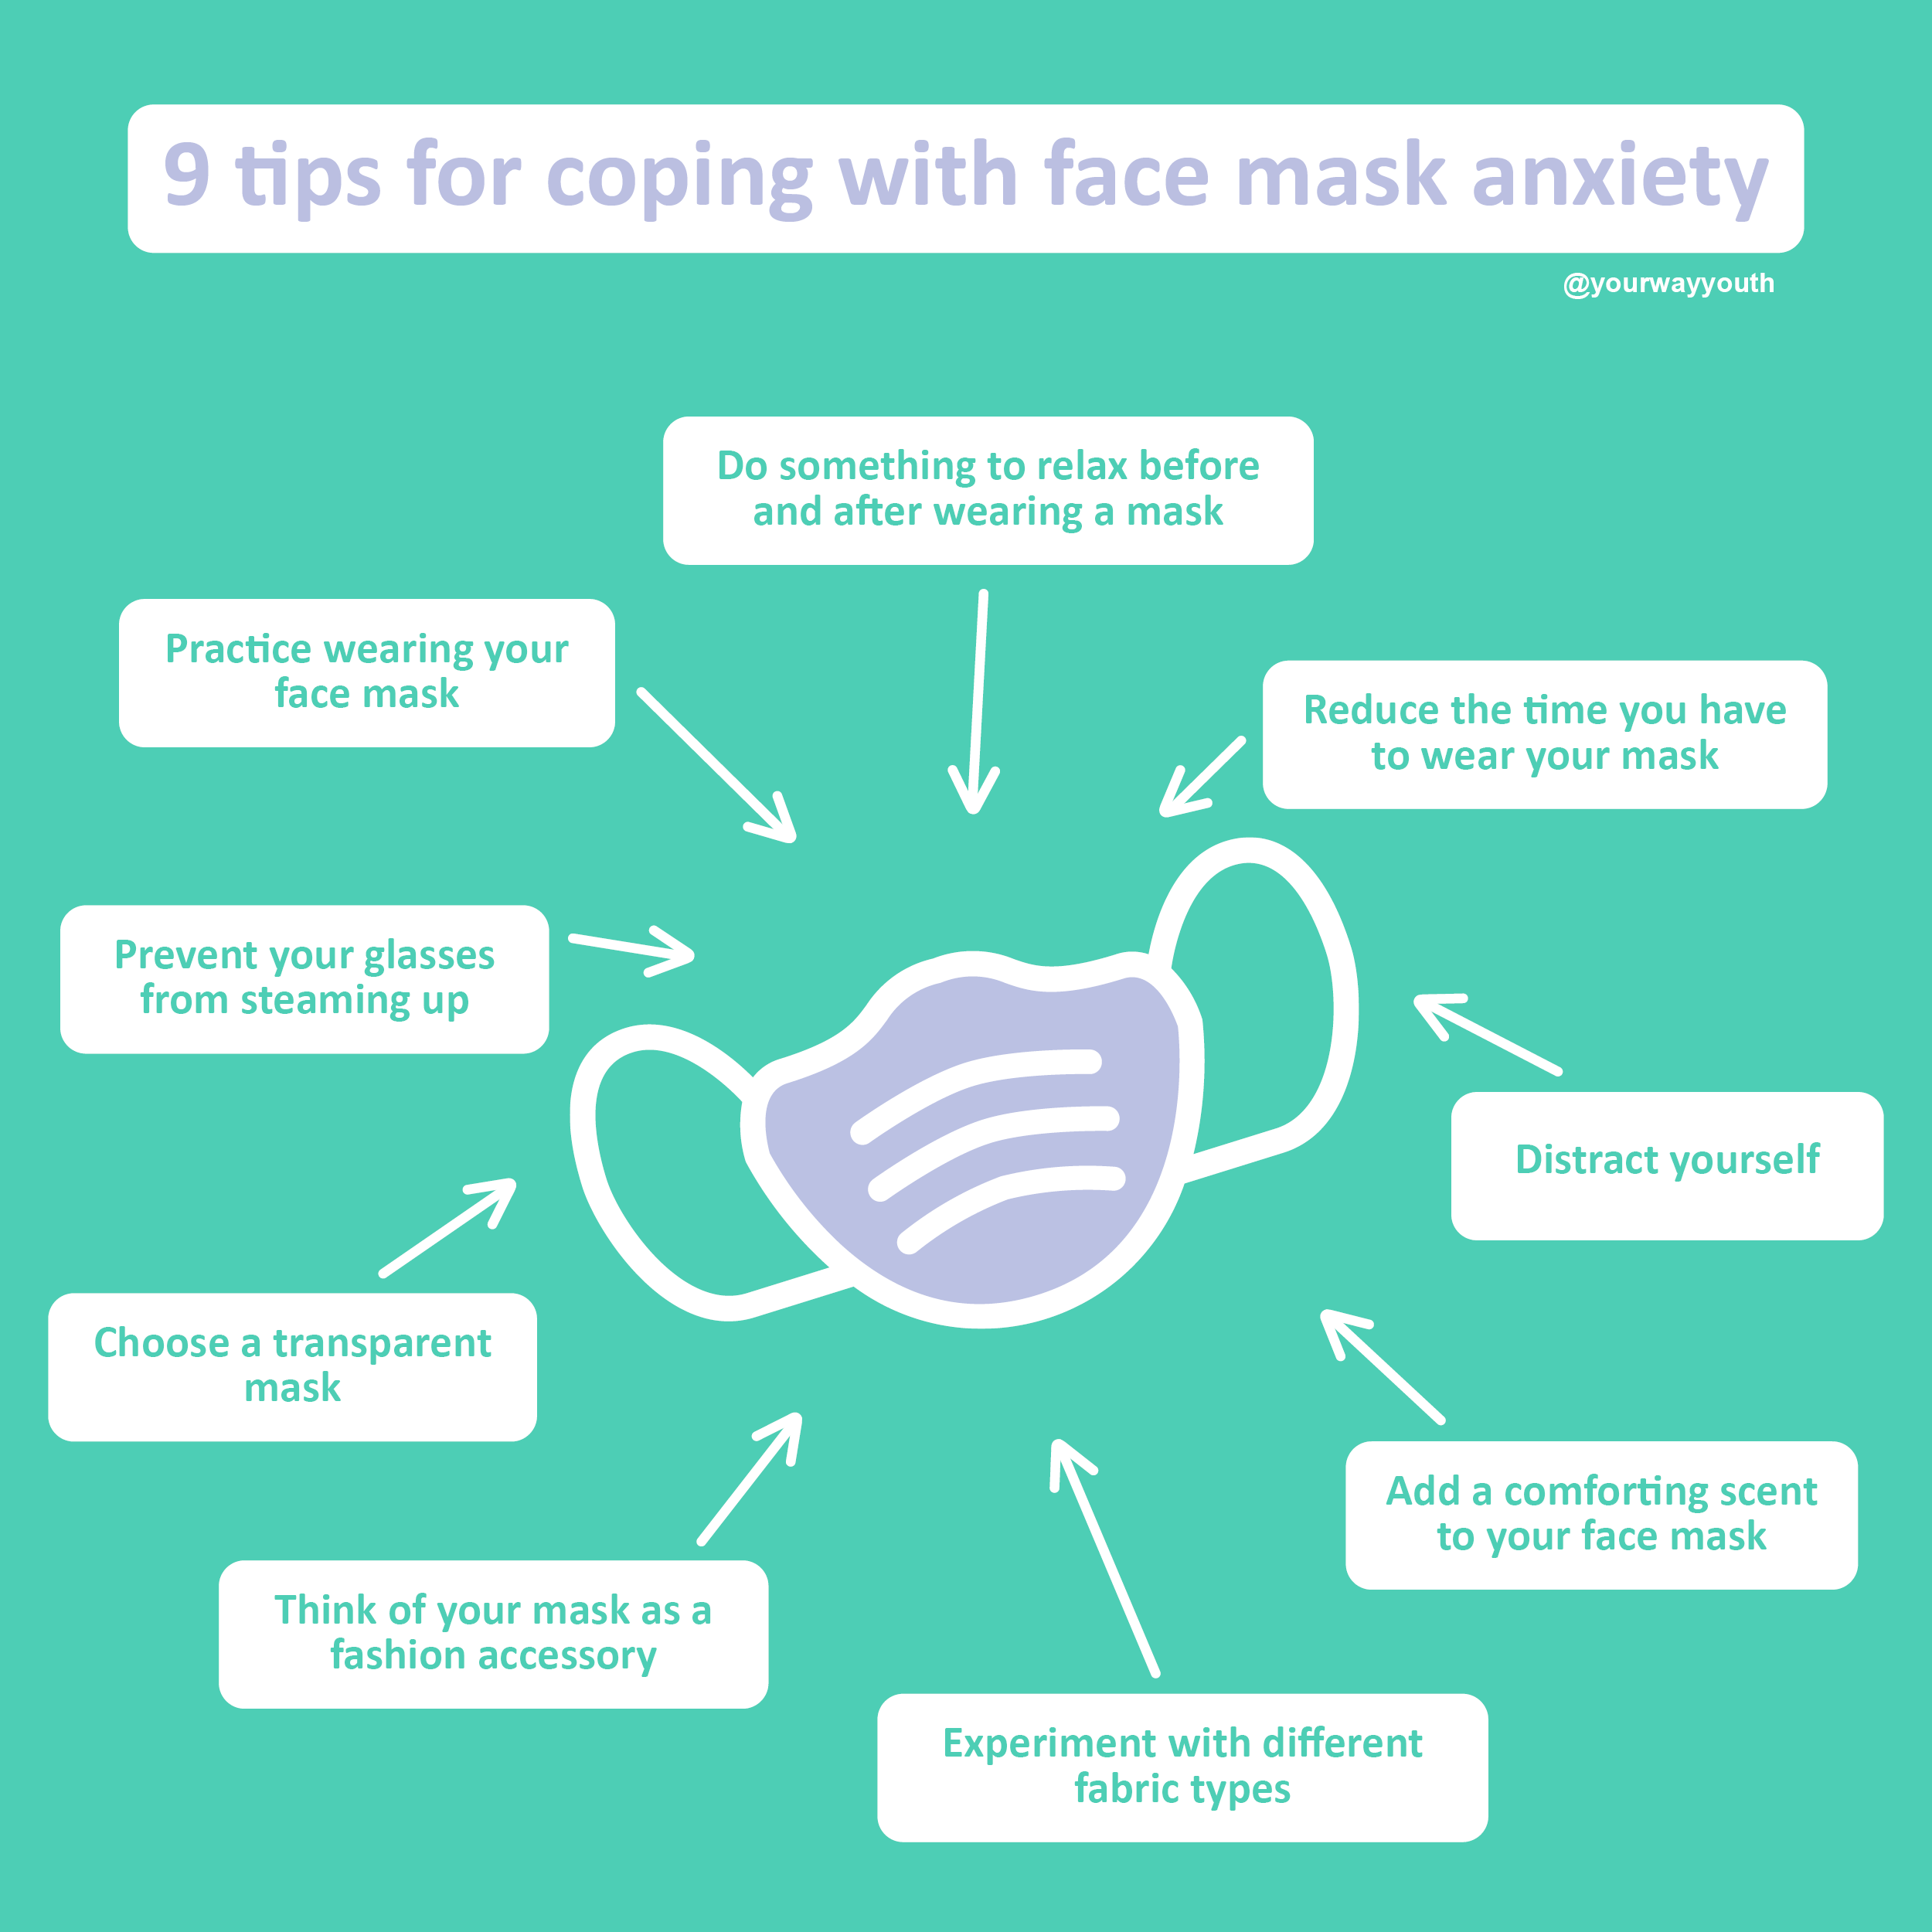 Occupational therapy for people with mask anxiety undergoing